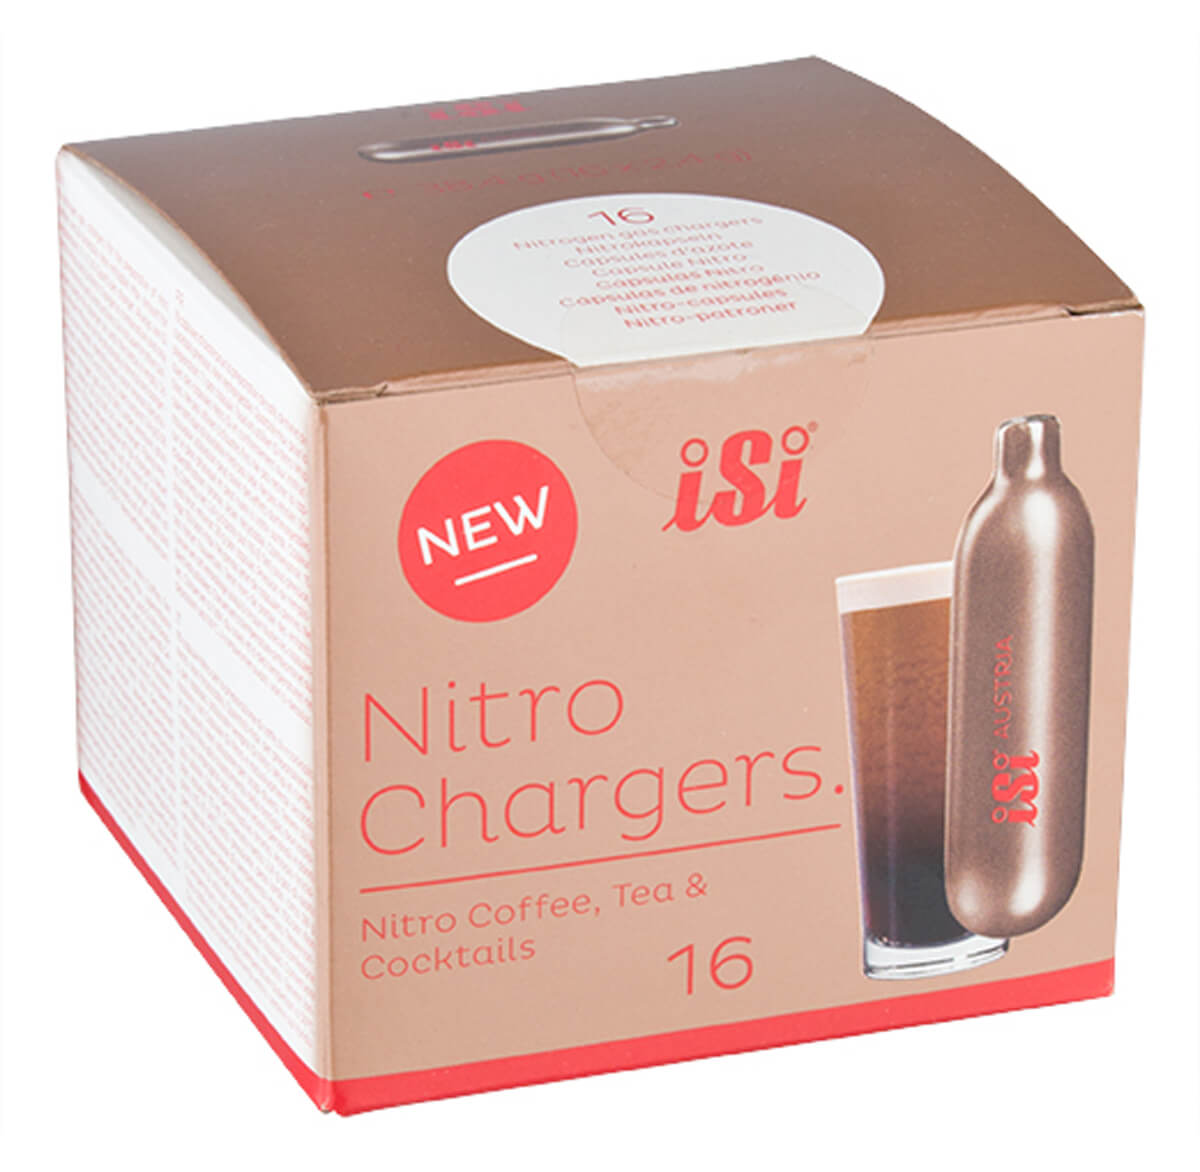 iSi Nitro Chargers - Nitrogen gas chargers (16 pcs.)